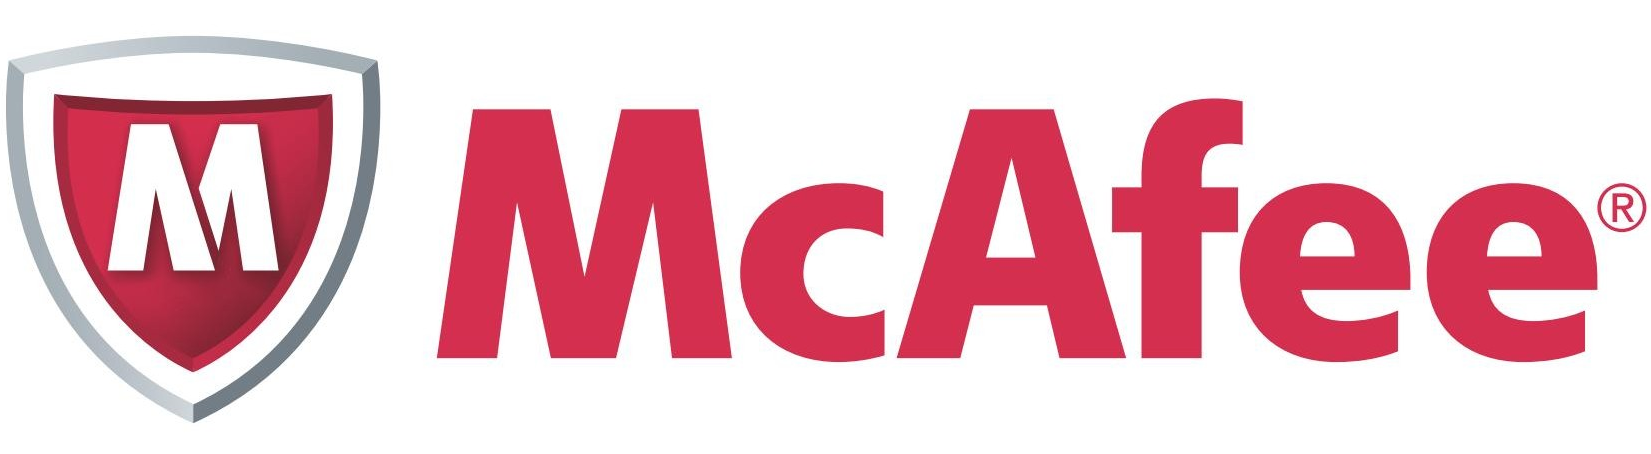 McAfee Foundstone PS Training - Technology Training Course